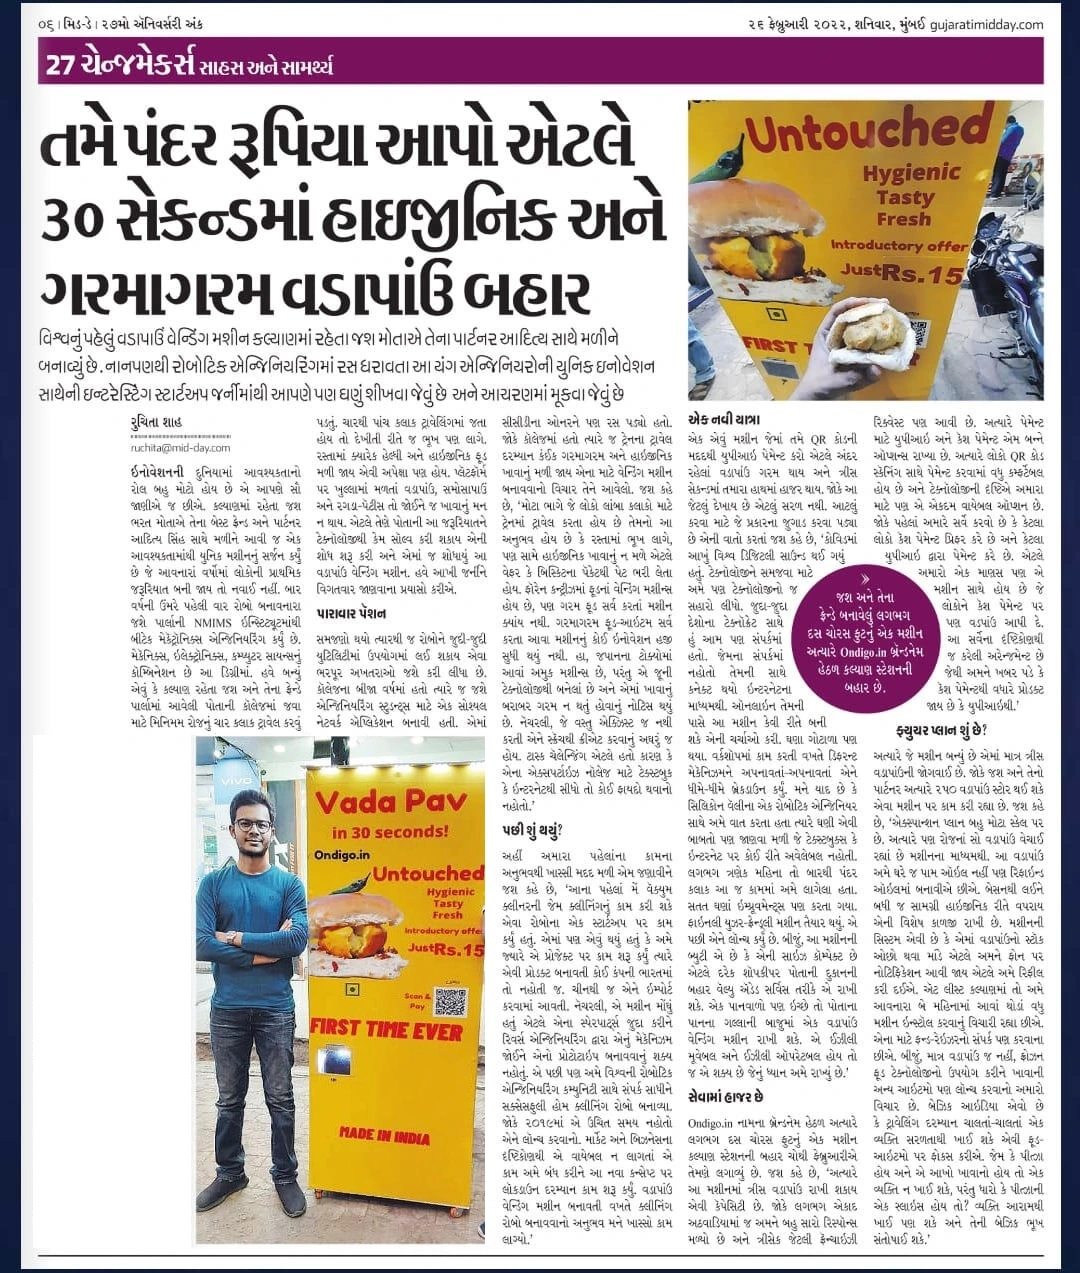 Jash Mota with the Ondigo robotic food kiosk as featured in Mid-day newspaper